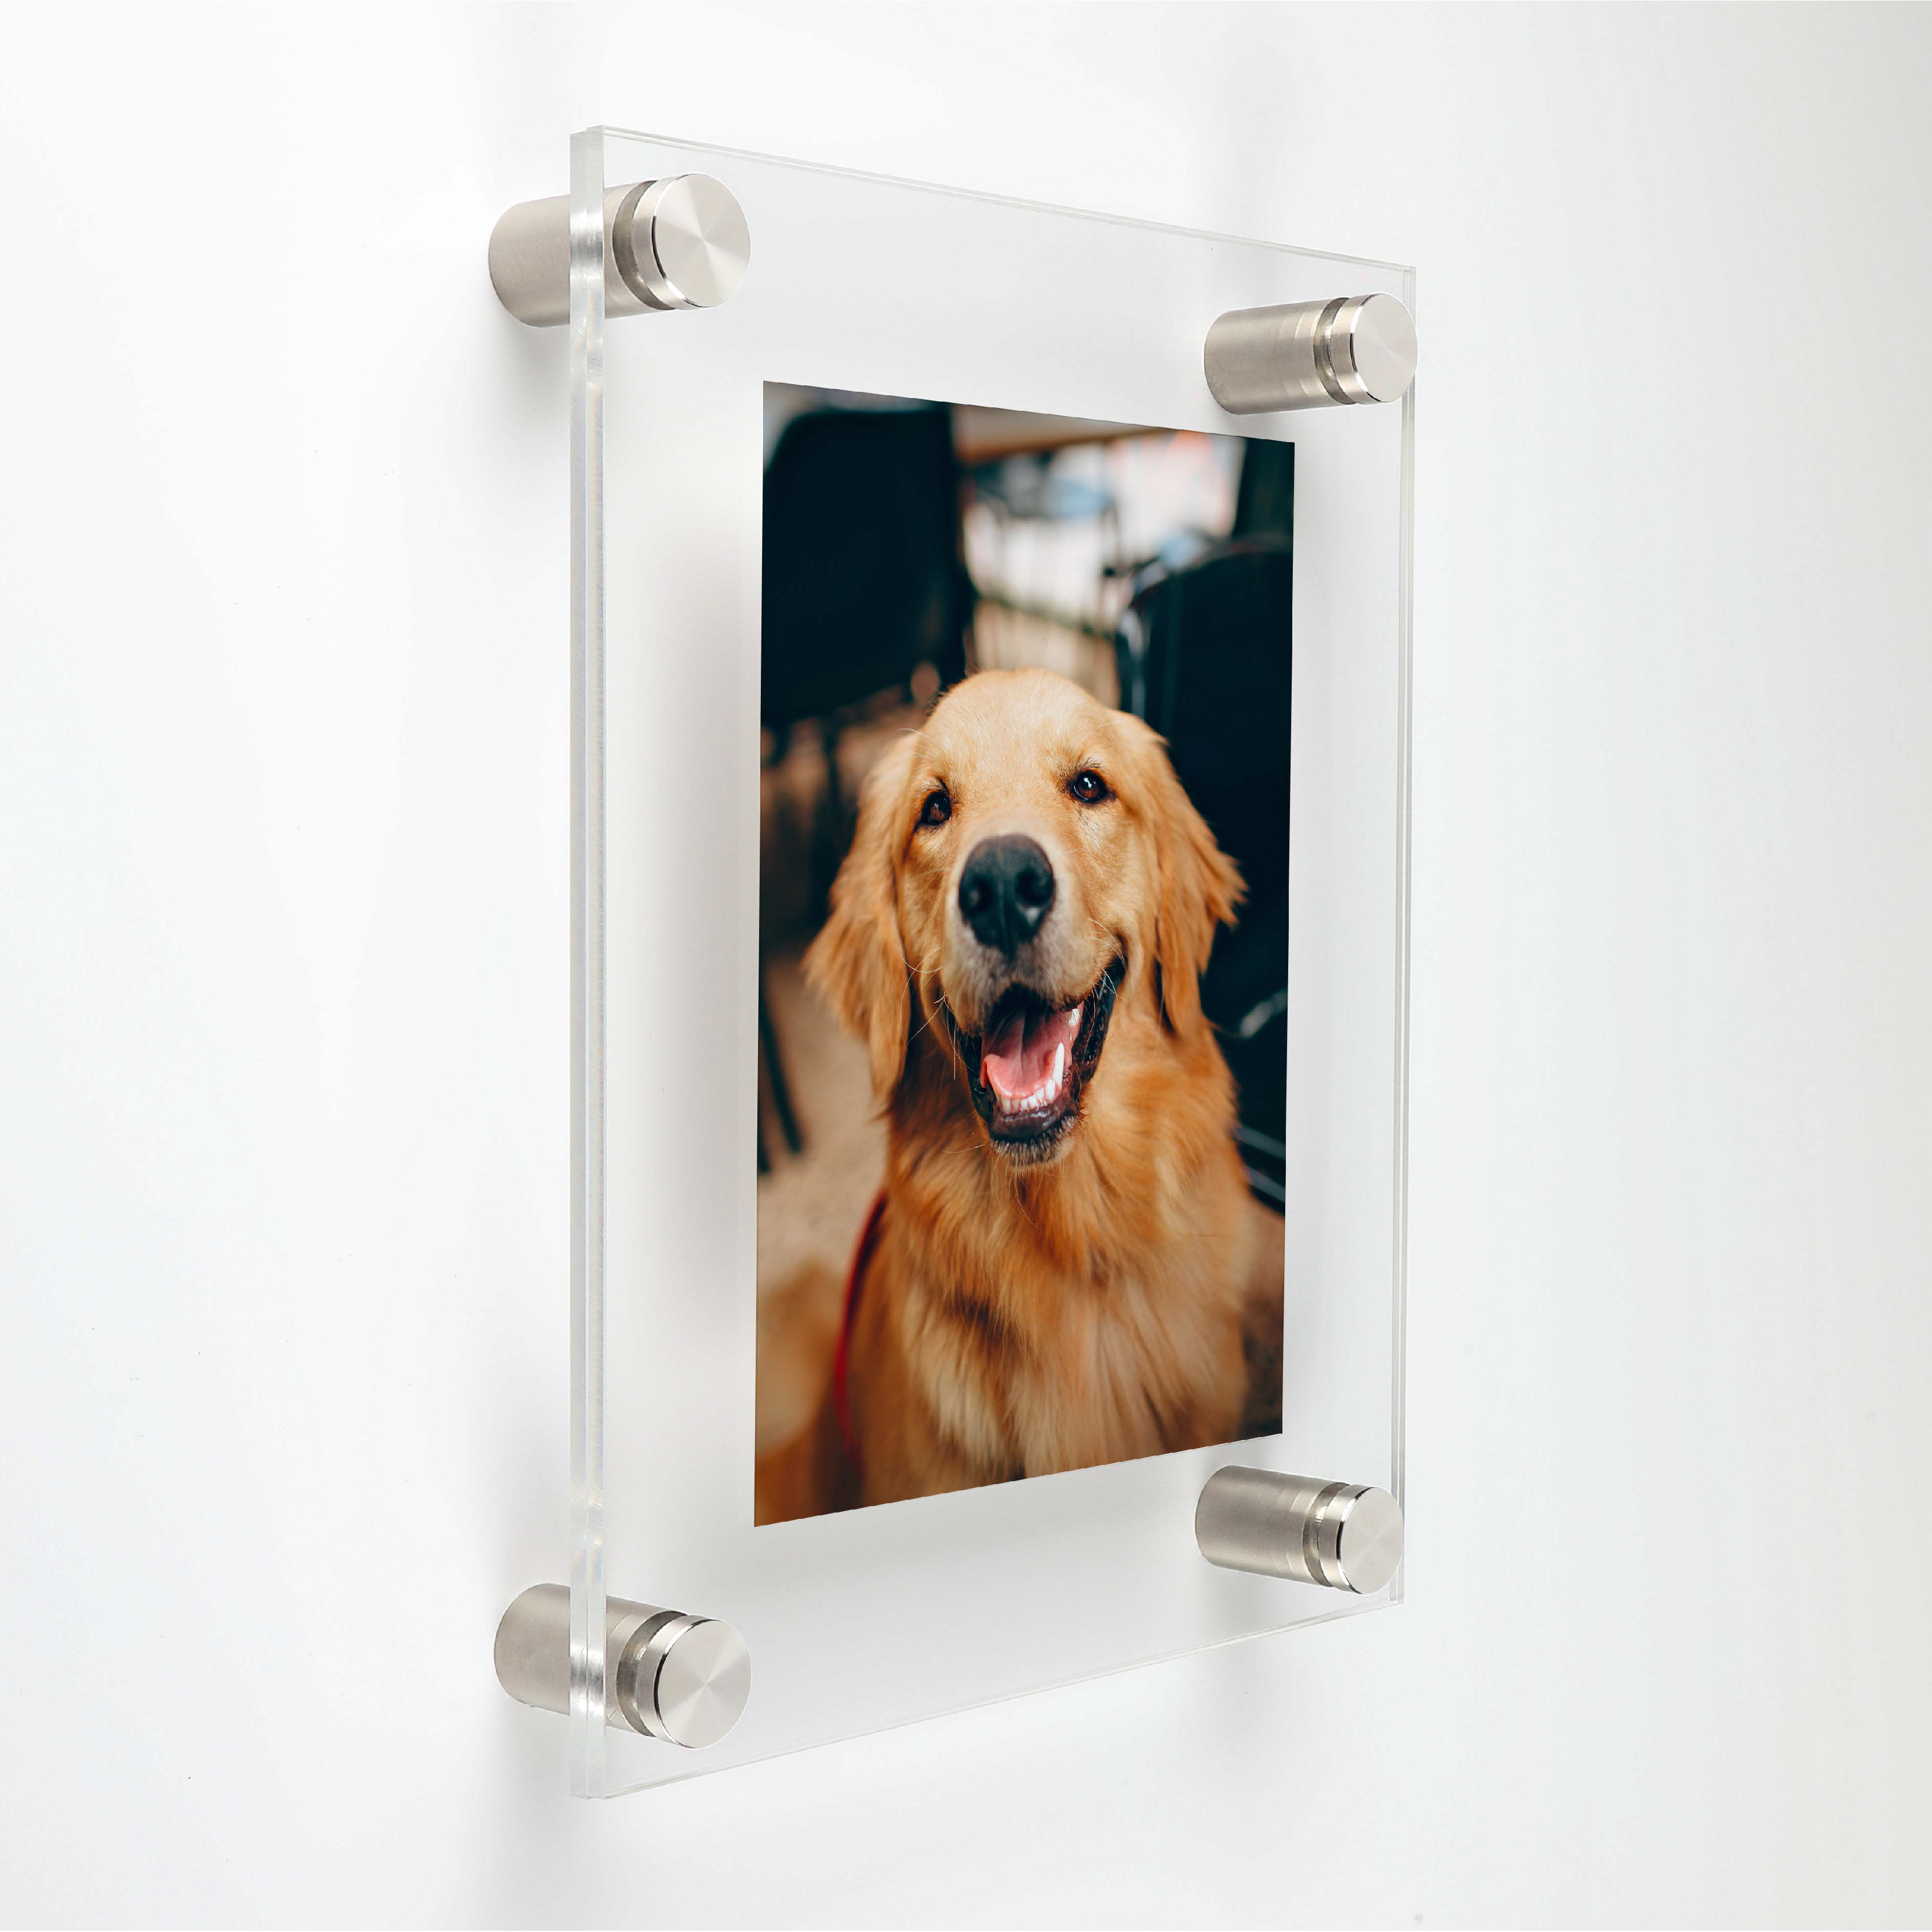 (2) 27'' x 39'' Clear Acrylics , Pre-Drilled With Polished Edges (Thick 3/16'' each), Wall Frame with (6) 3/4'' x 1'' Brushed Stainless Steel Standoffs includes Screws and Anchors